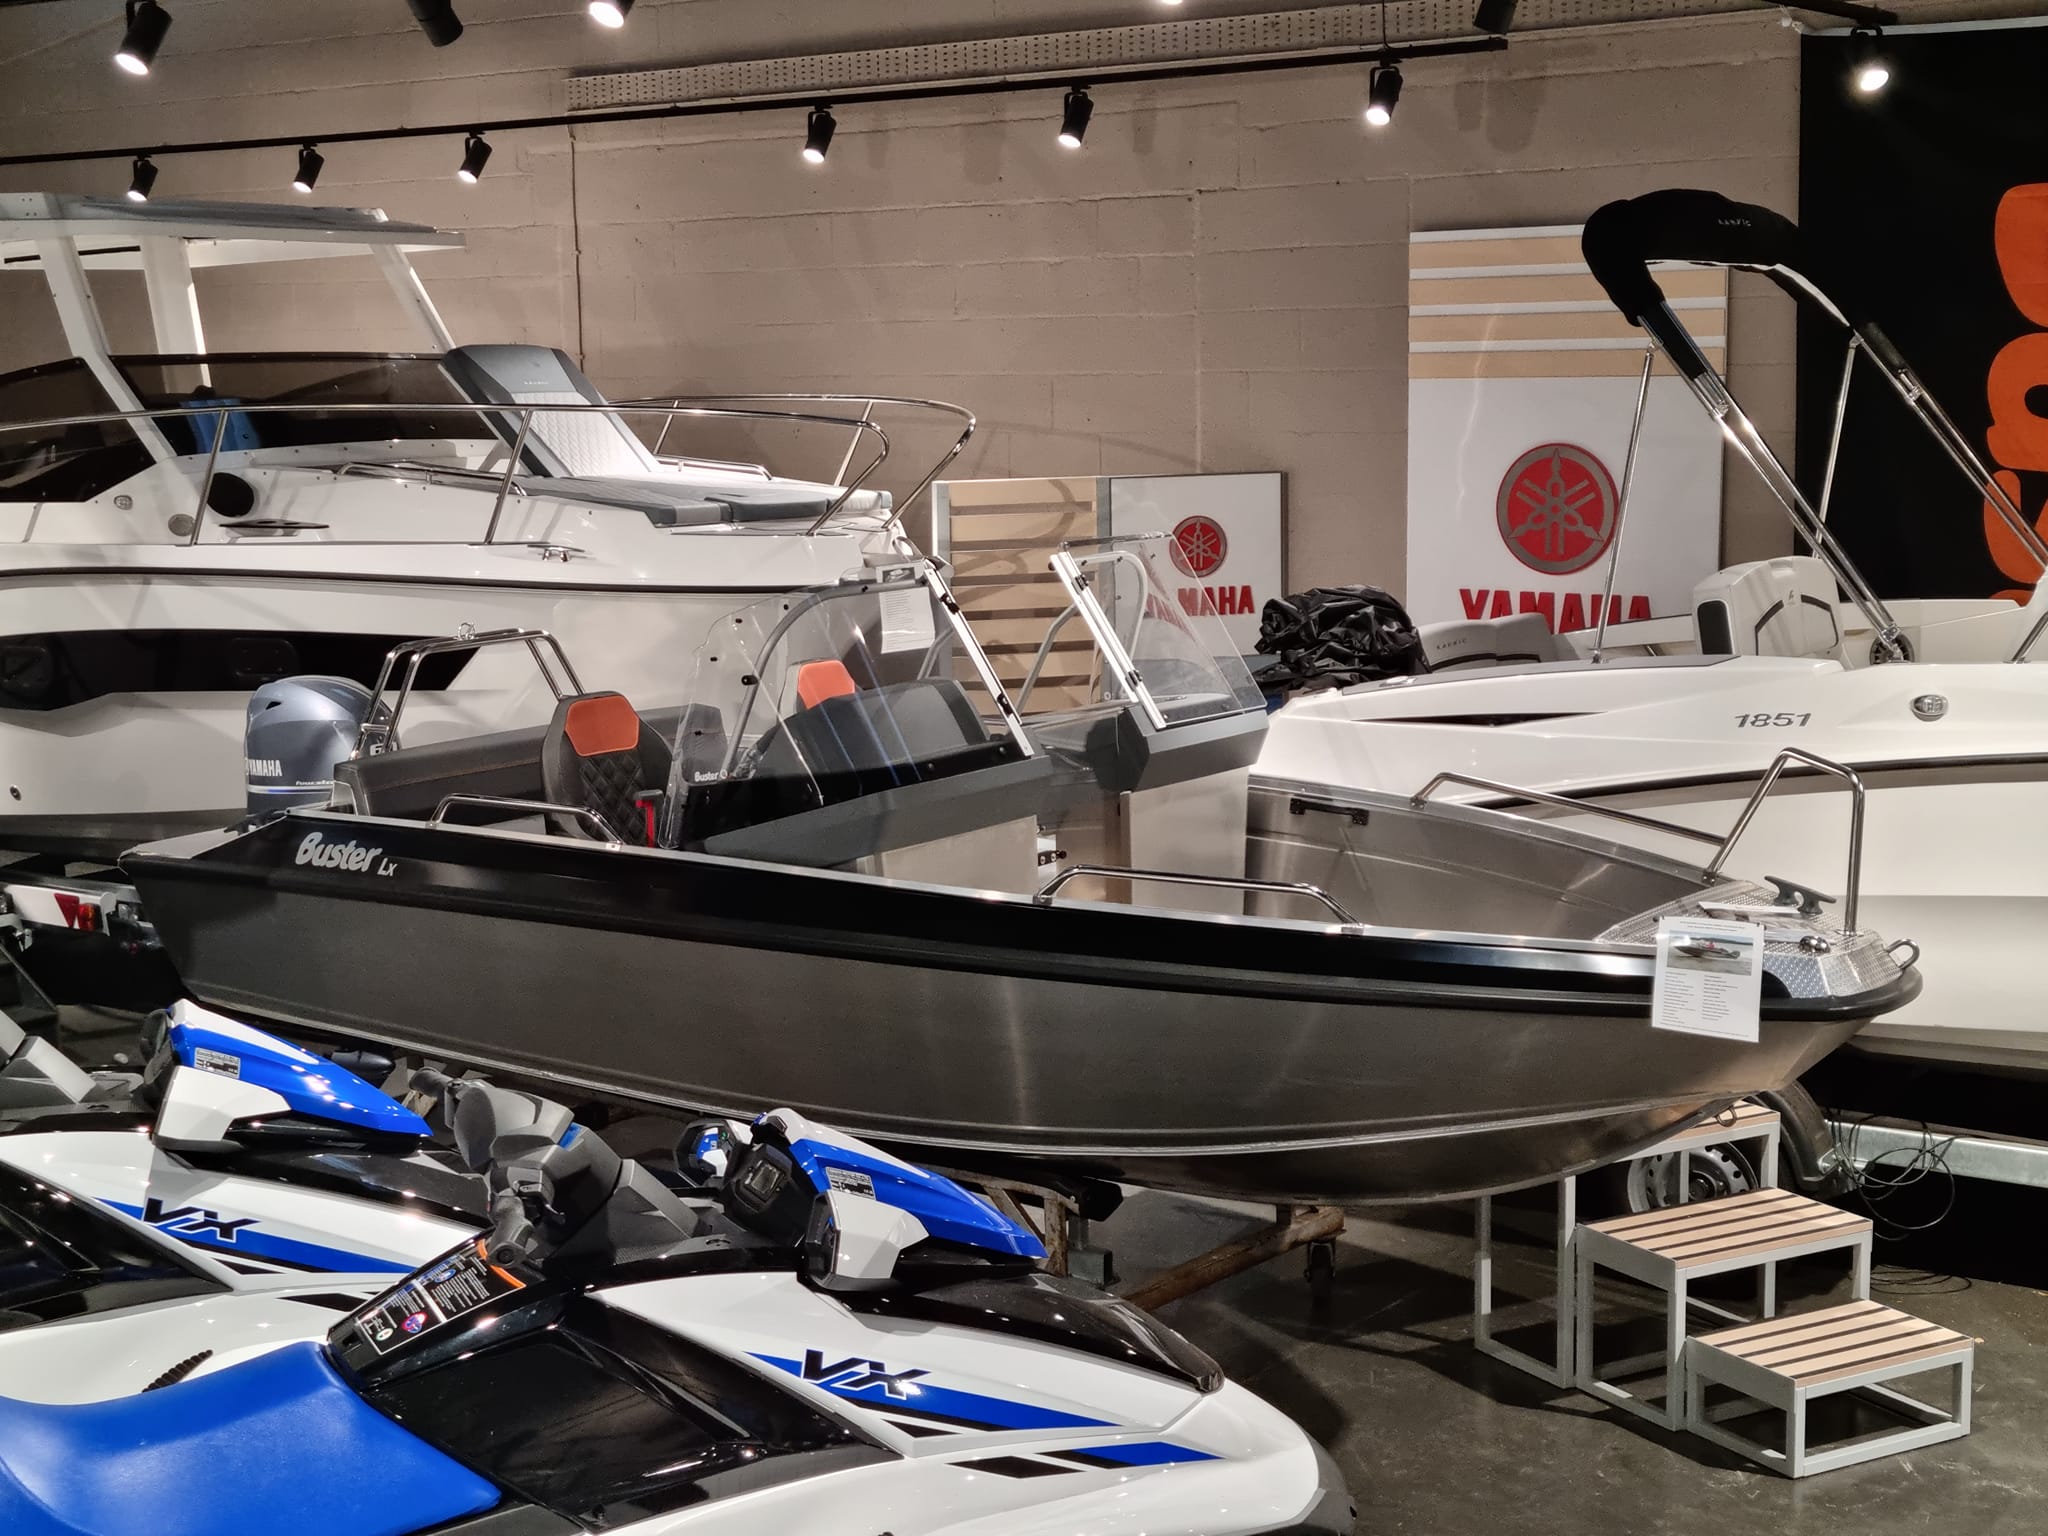 New BUSTER LX Premium Edition Aluminium Boat with Yamaha 60FETL Outboard Engine